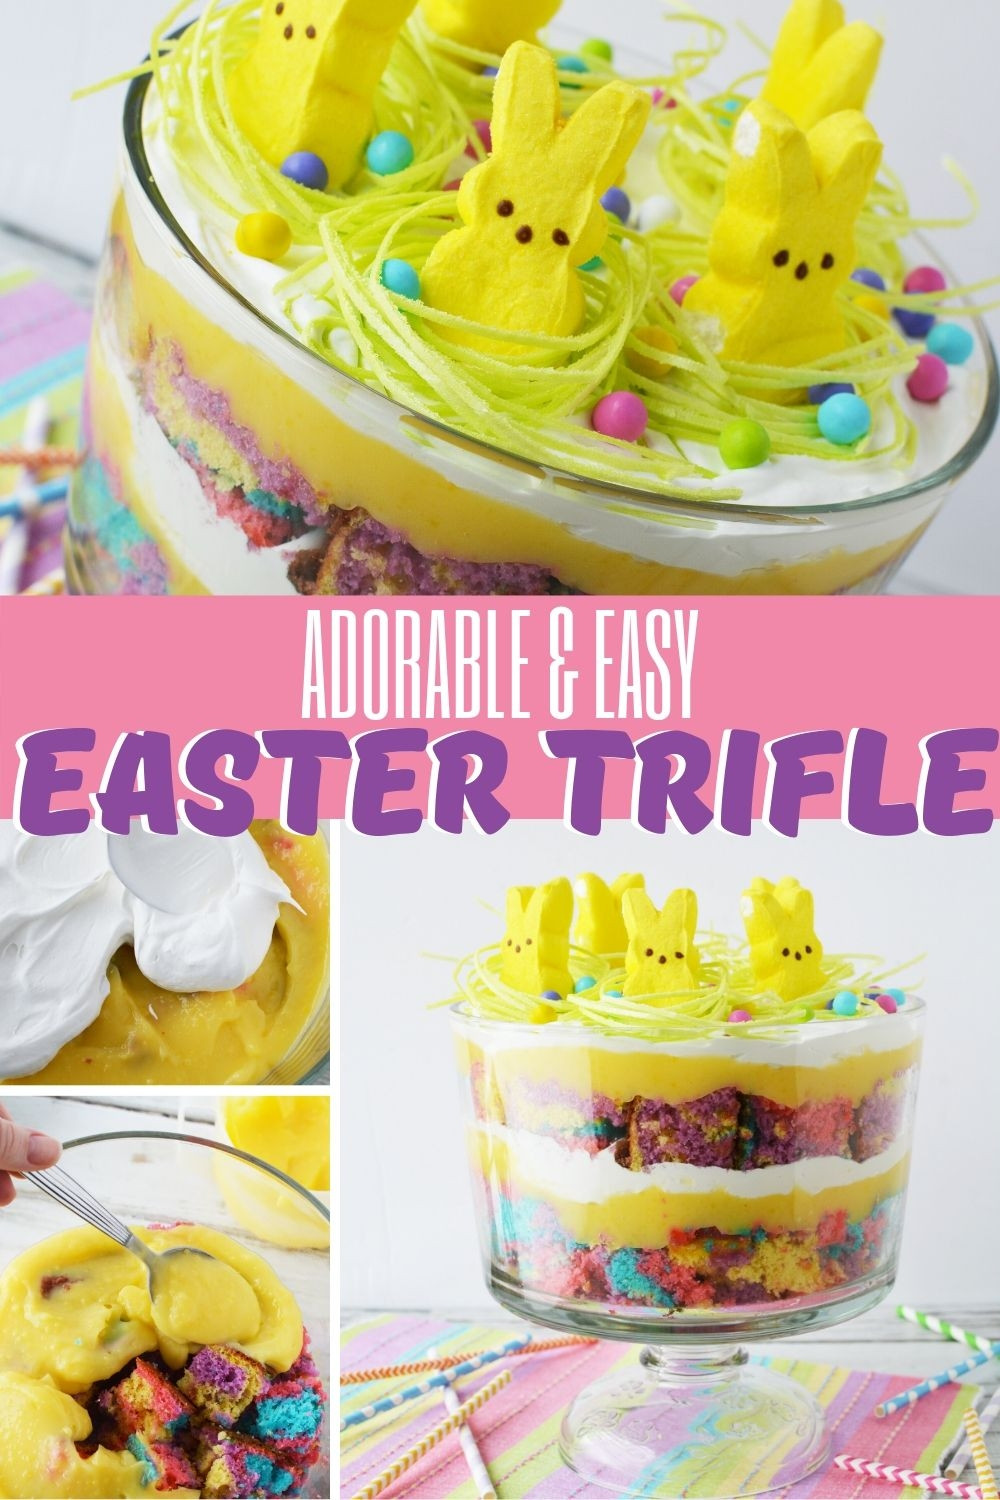 Cute Easy Easter Desserts
 Cute & Easy The Easter Trifle Dessert Recipe You Need To Make